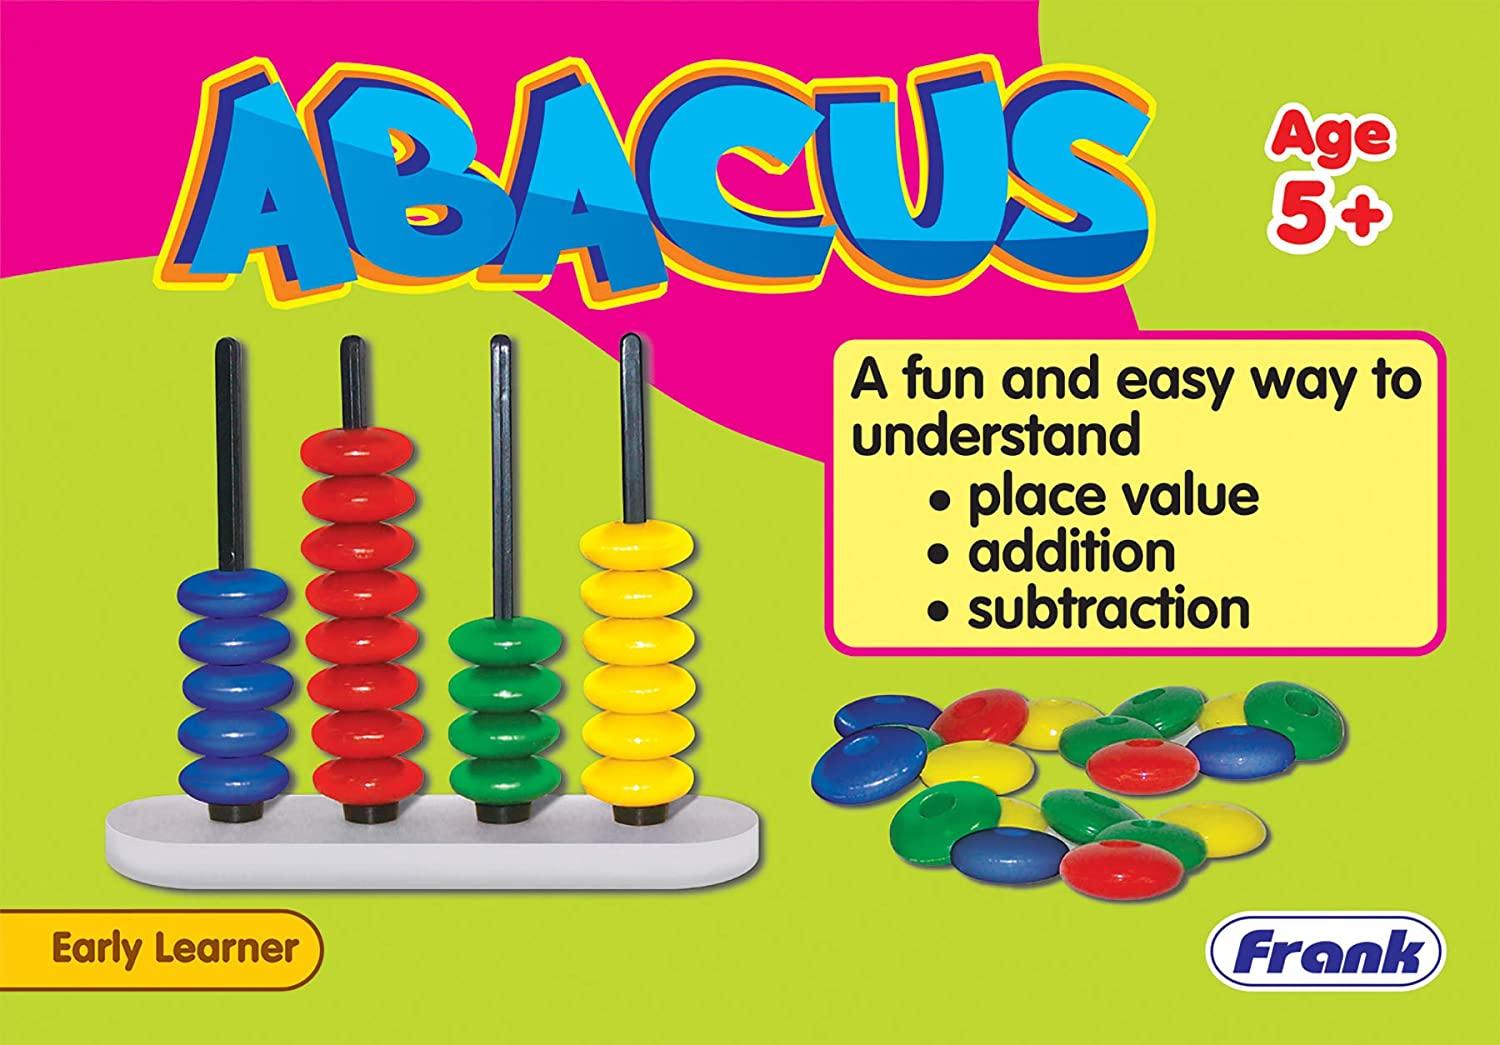 Frank Abacus Puzzle